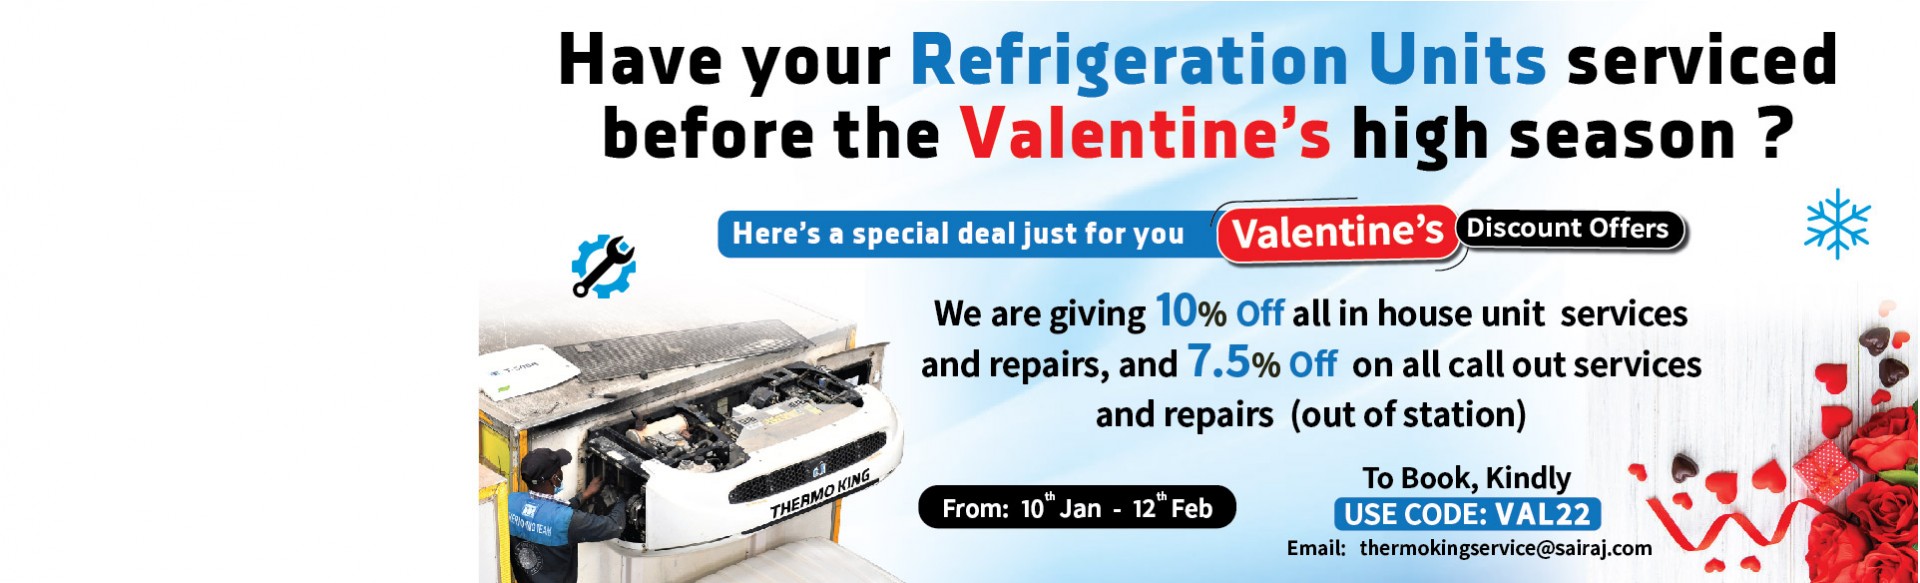 Thermo King Valentine Offer 